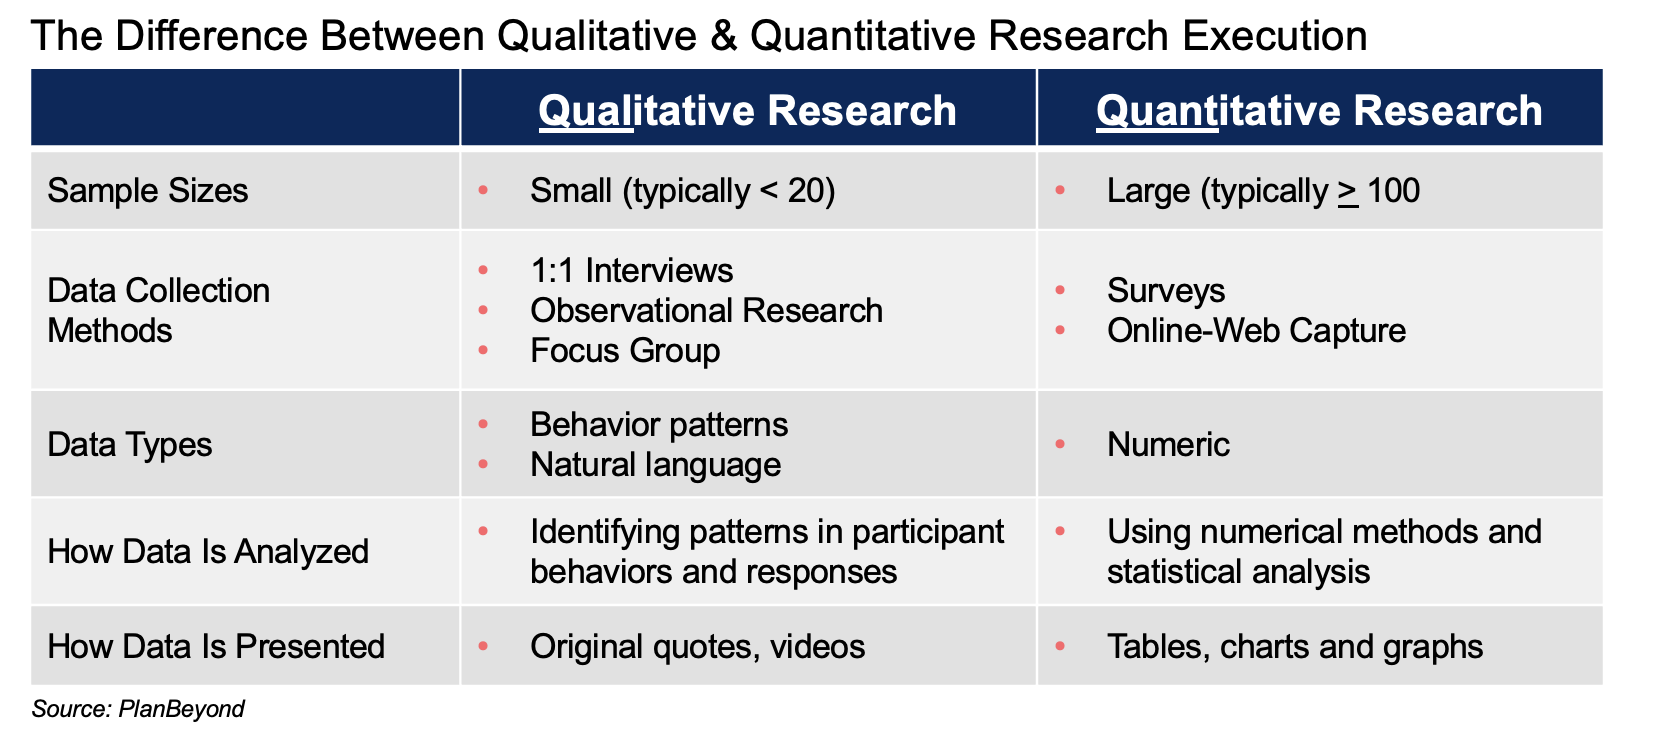 The Difference Between Qualitative & Quantitative Research Execution